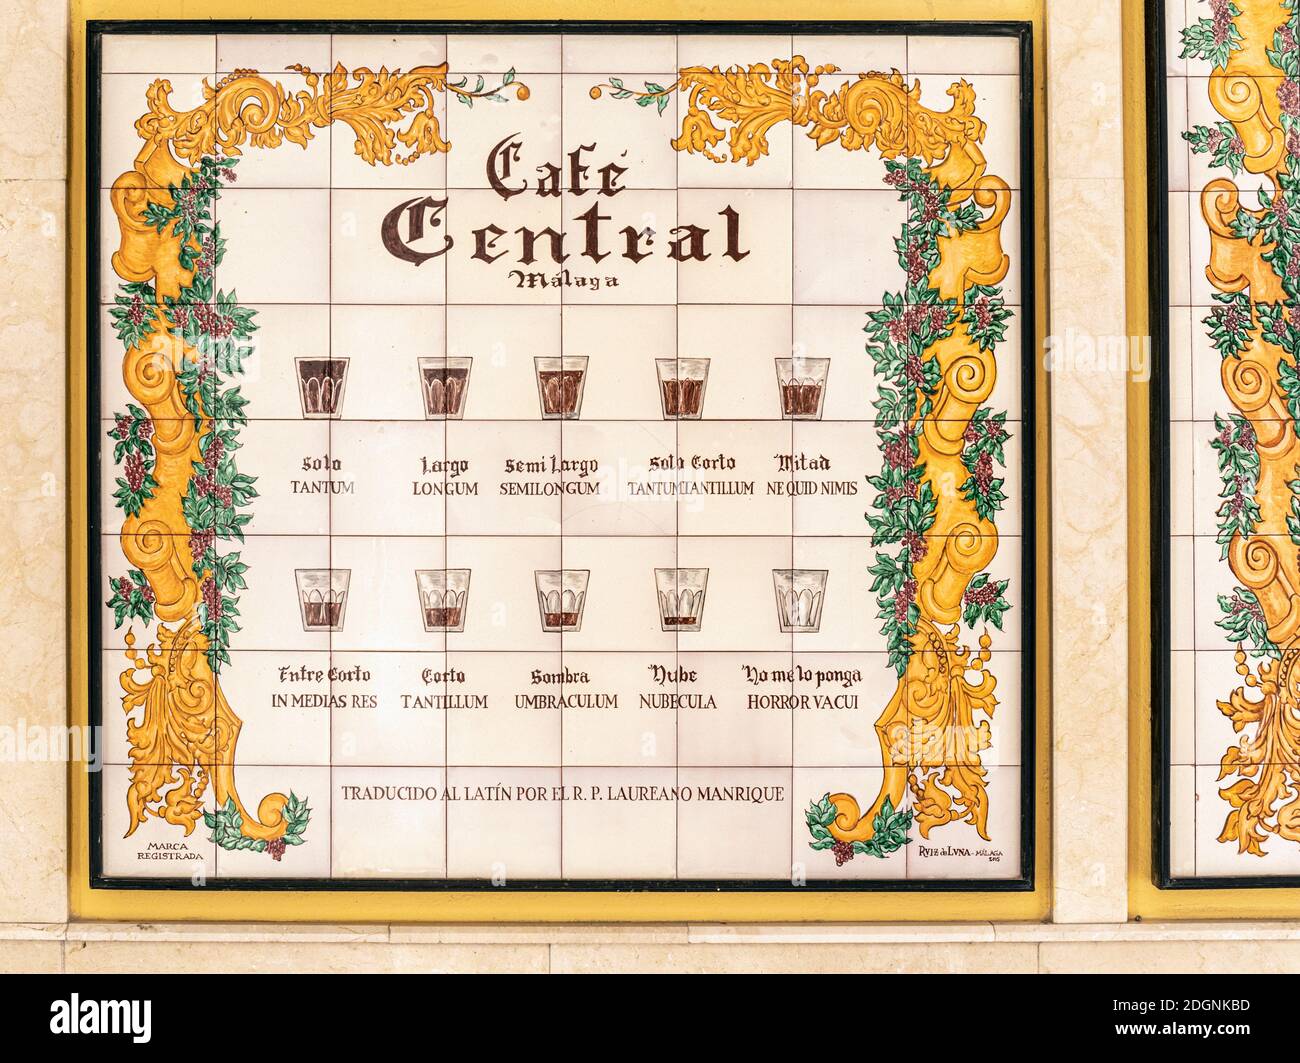 How to order your coffee.  Decorative ceramic tile display outside the Cafe Central in Malaga, Spain demonstrating 10 different ways of ordering coffe Stock Photo